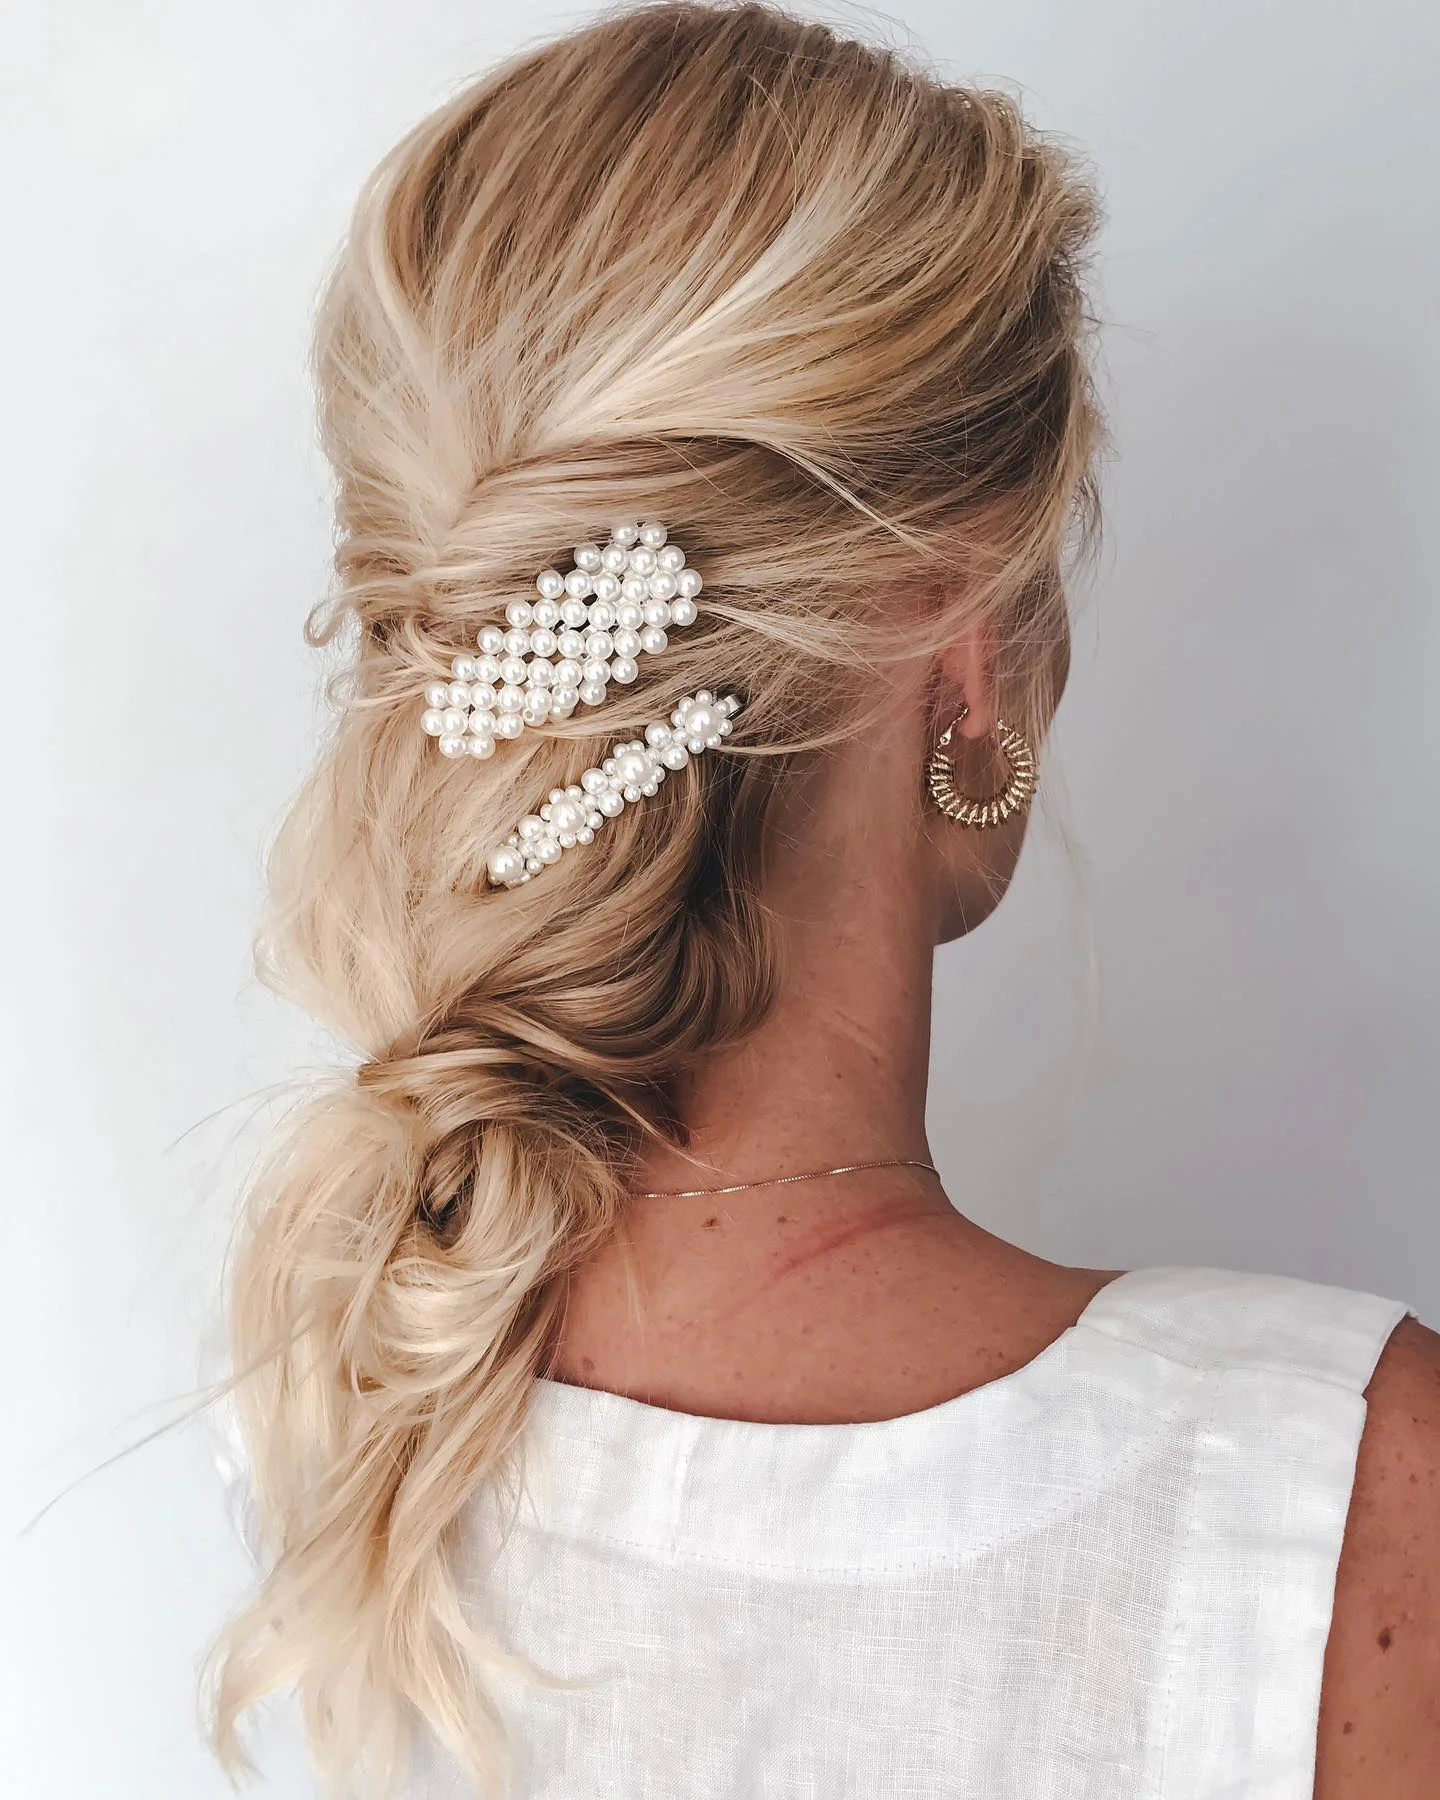 Best-wedding-updo-hairstyles-braid-Airlie-and-Co